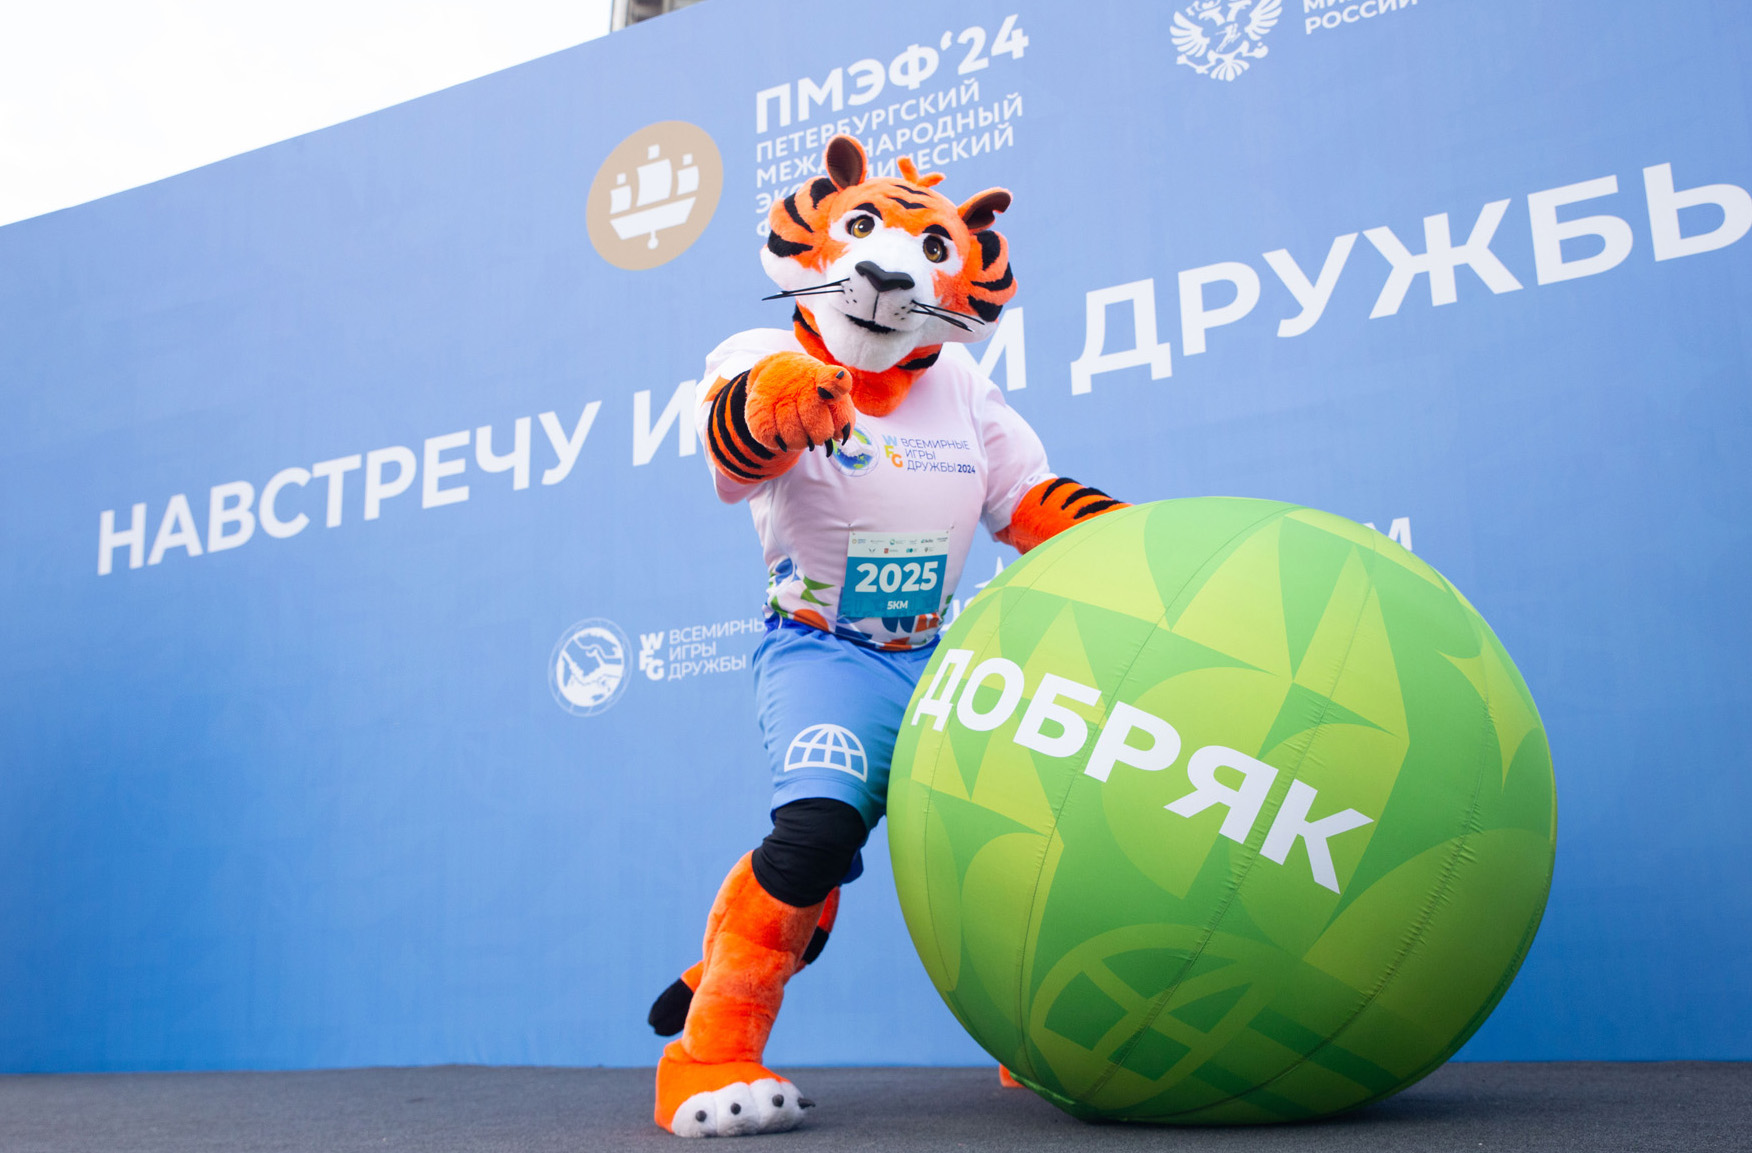 The World Friendship Games Mascot Has Been Named